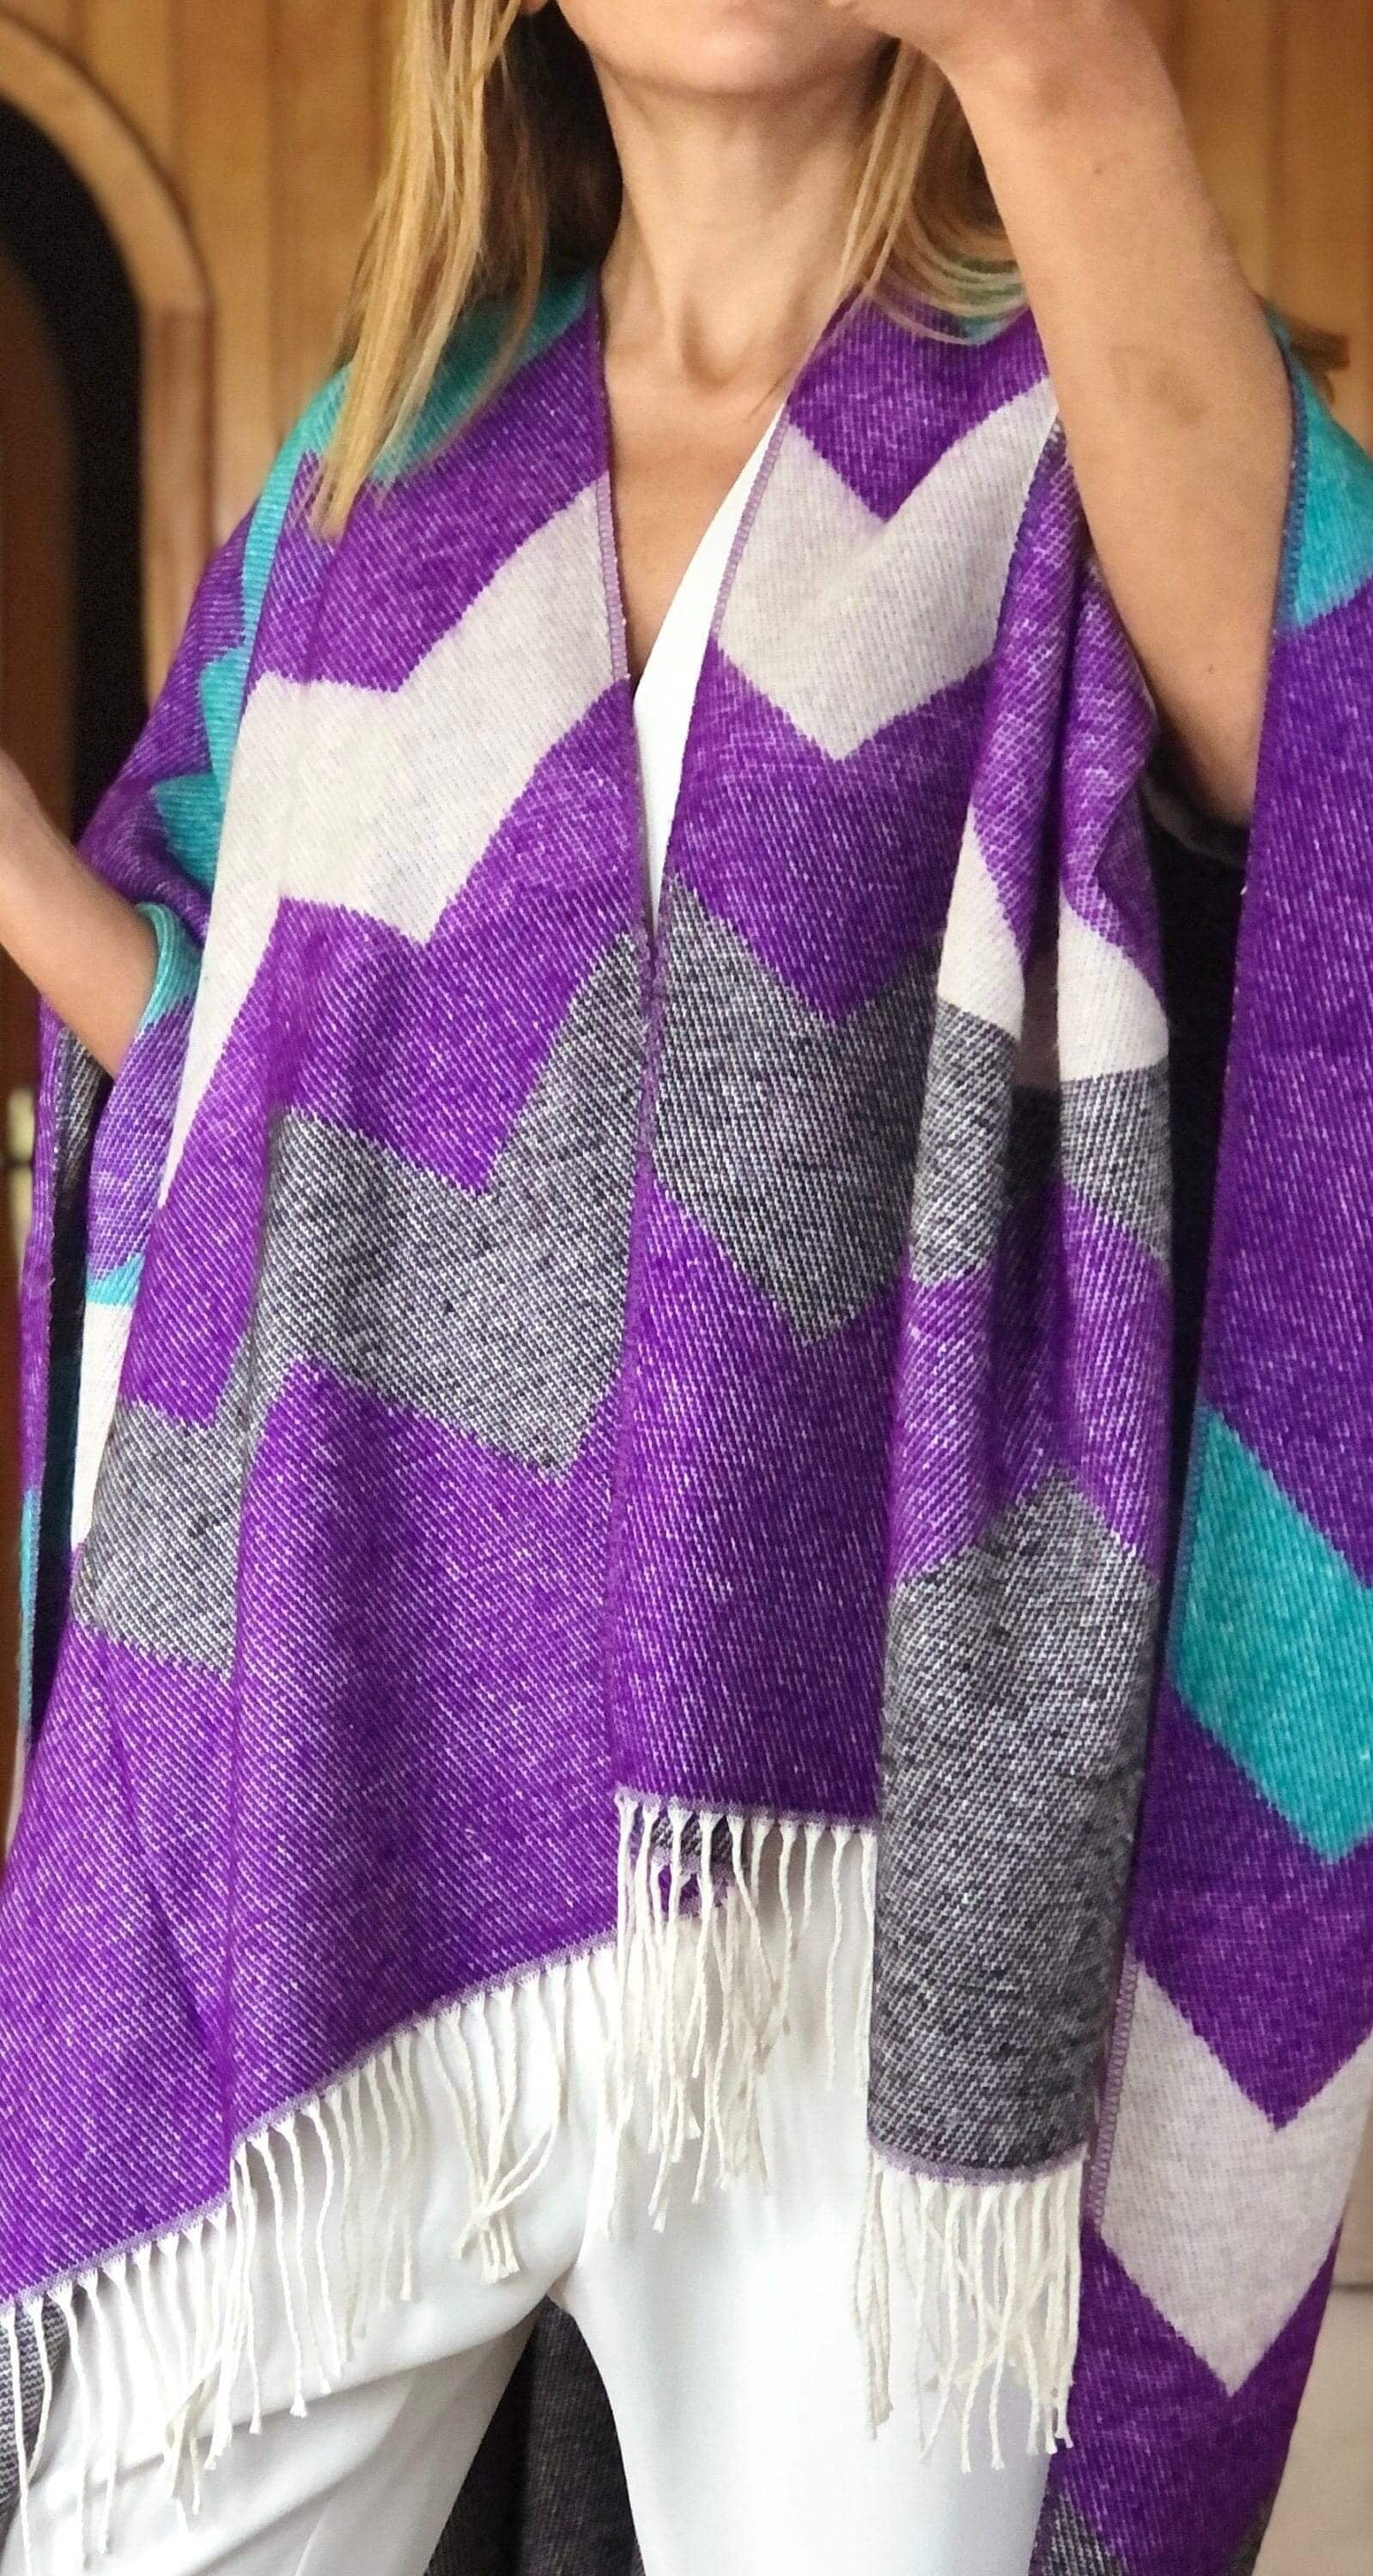 Purple and gray wool blend poncho with white and blue accents